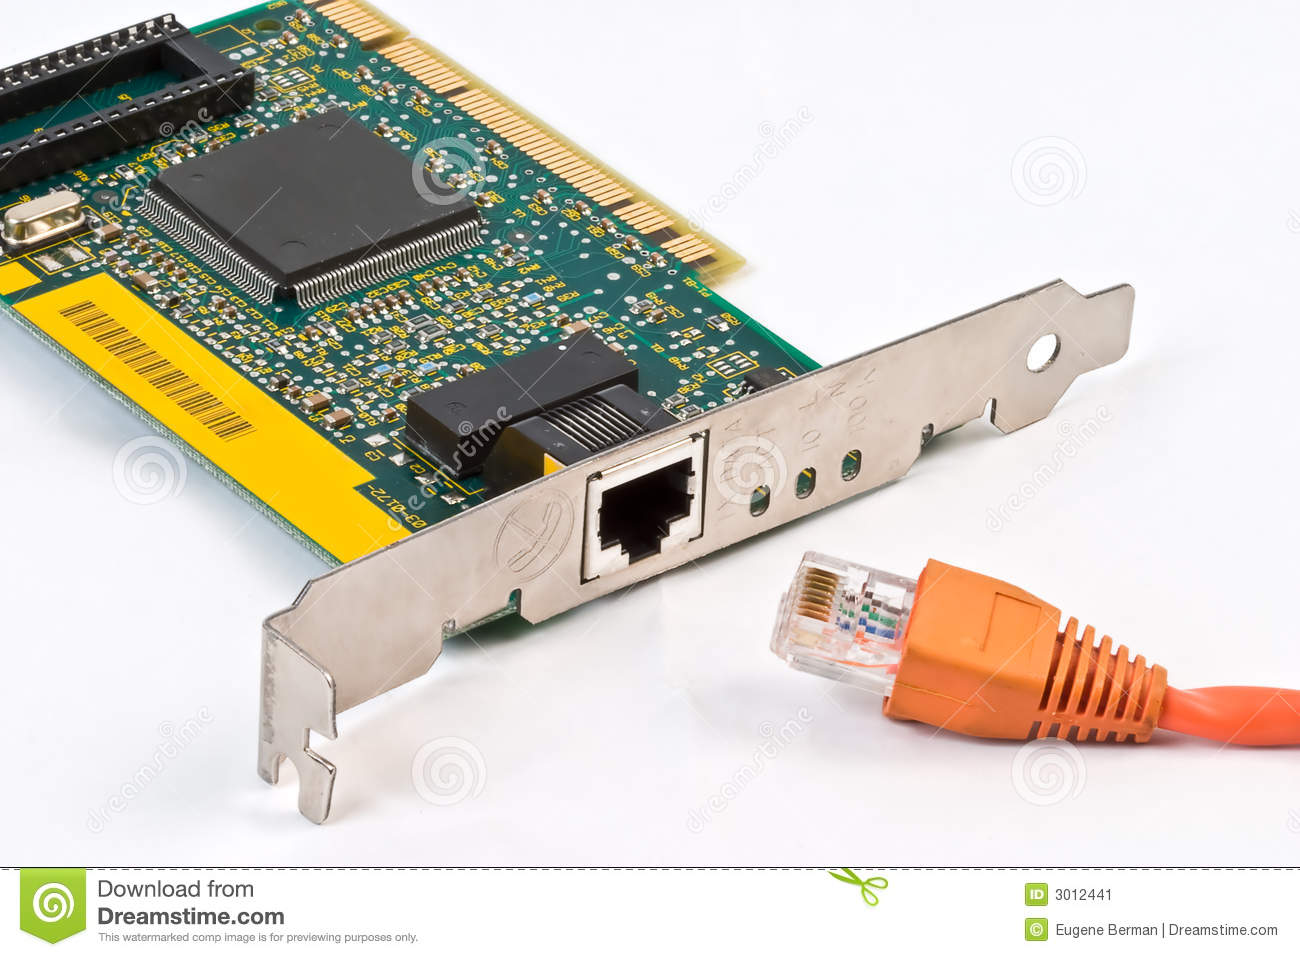 Network Card And Cable Stock Image   Image  3012441